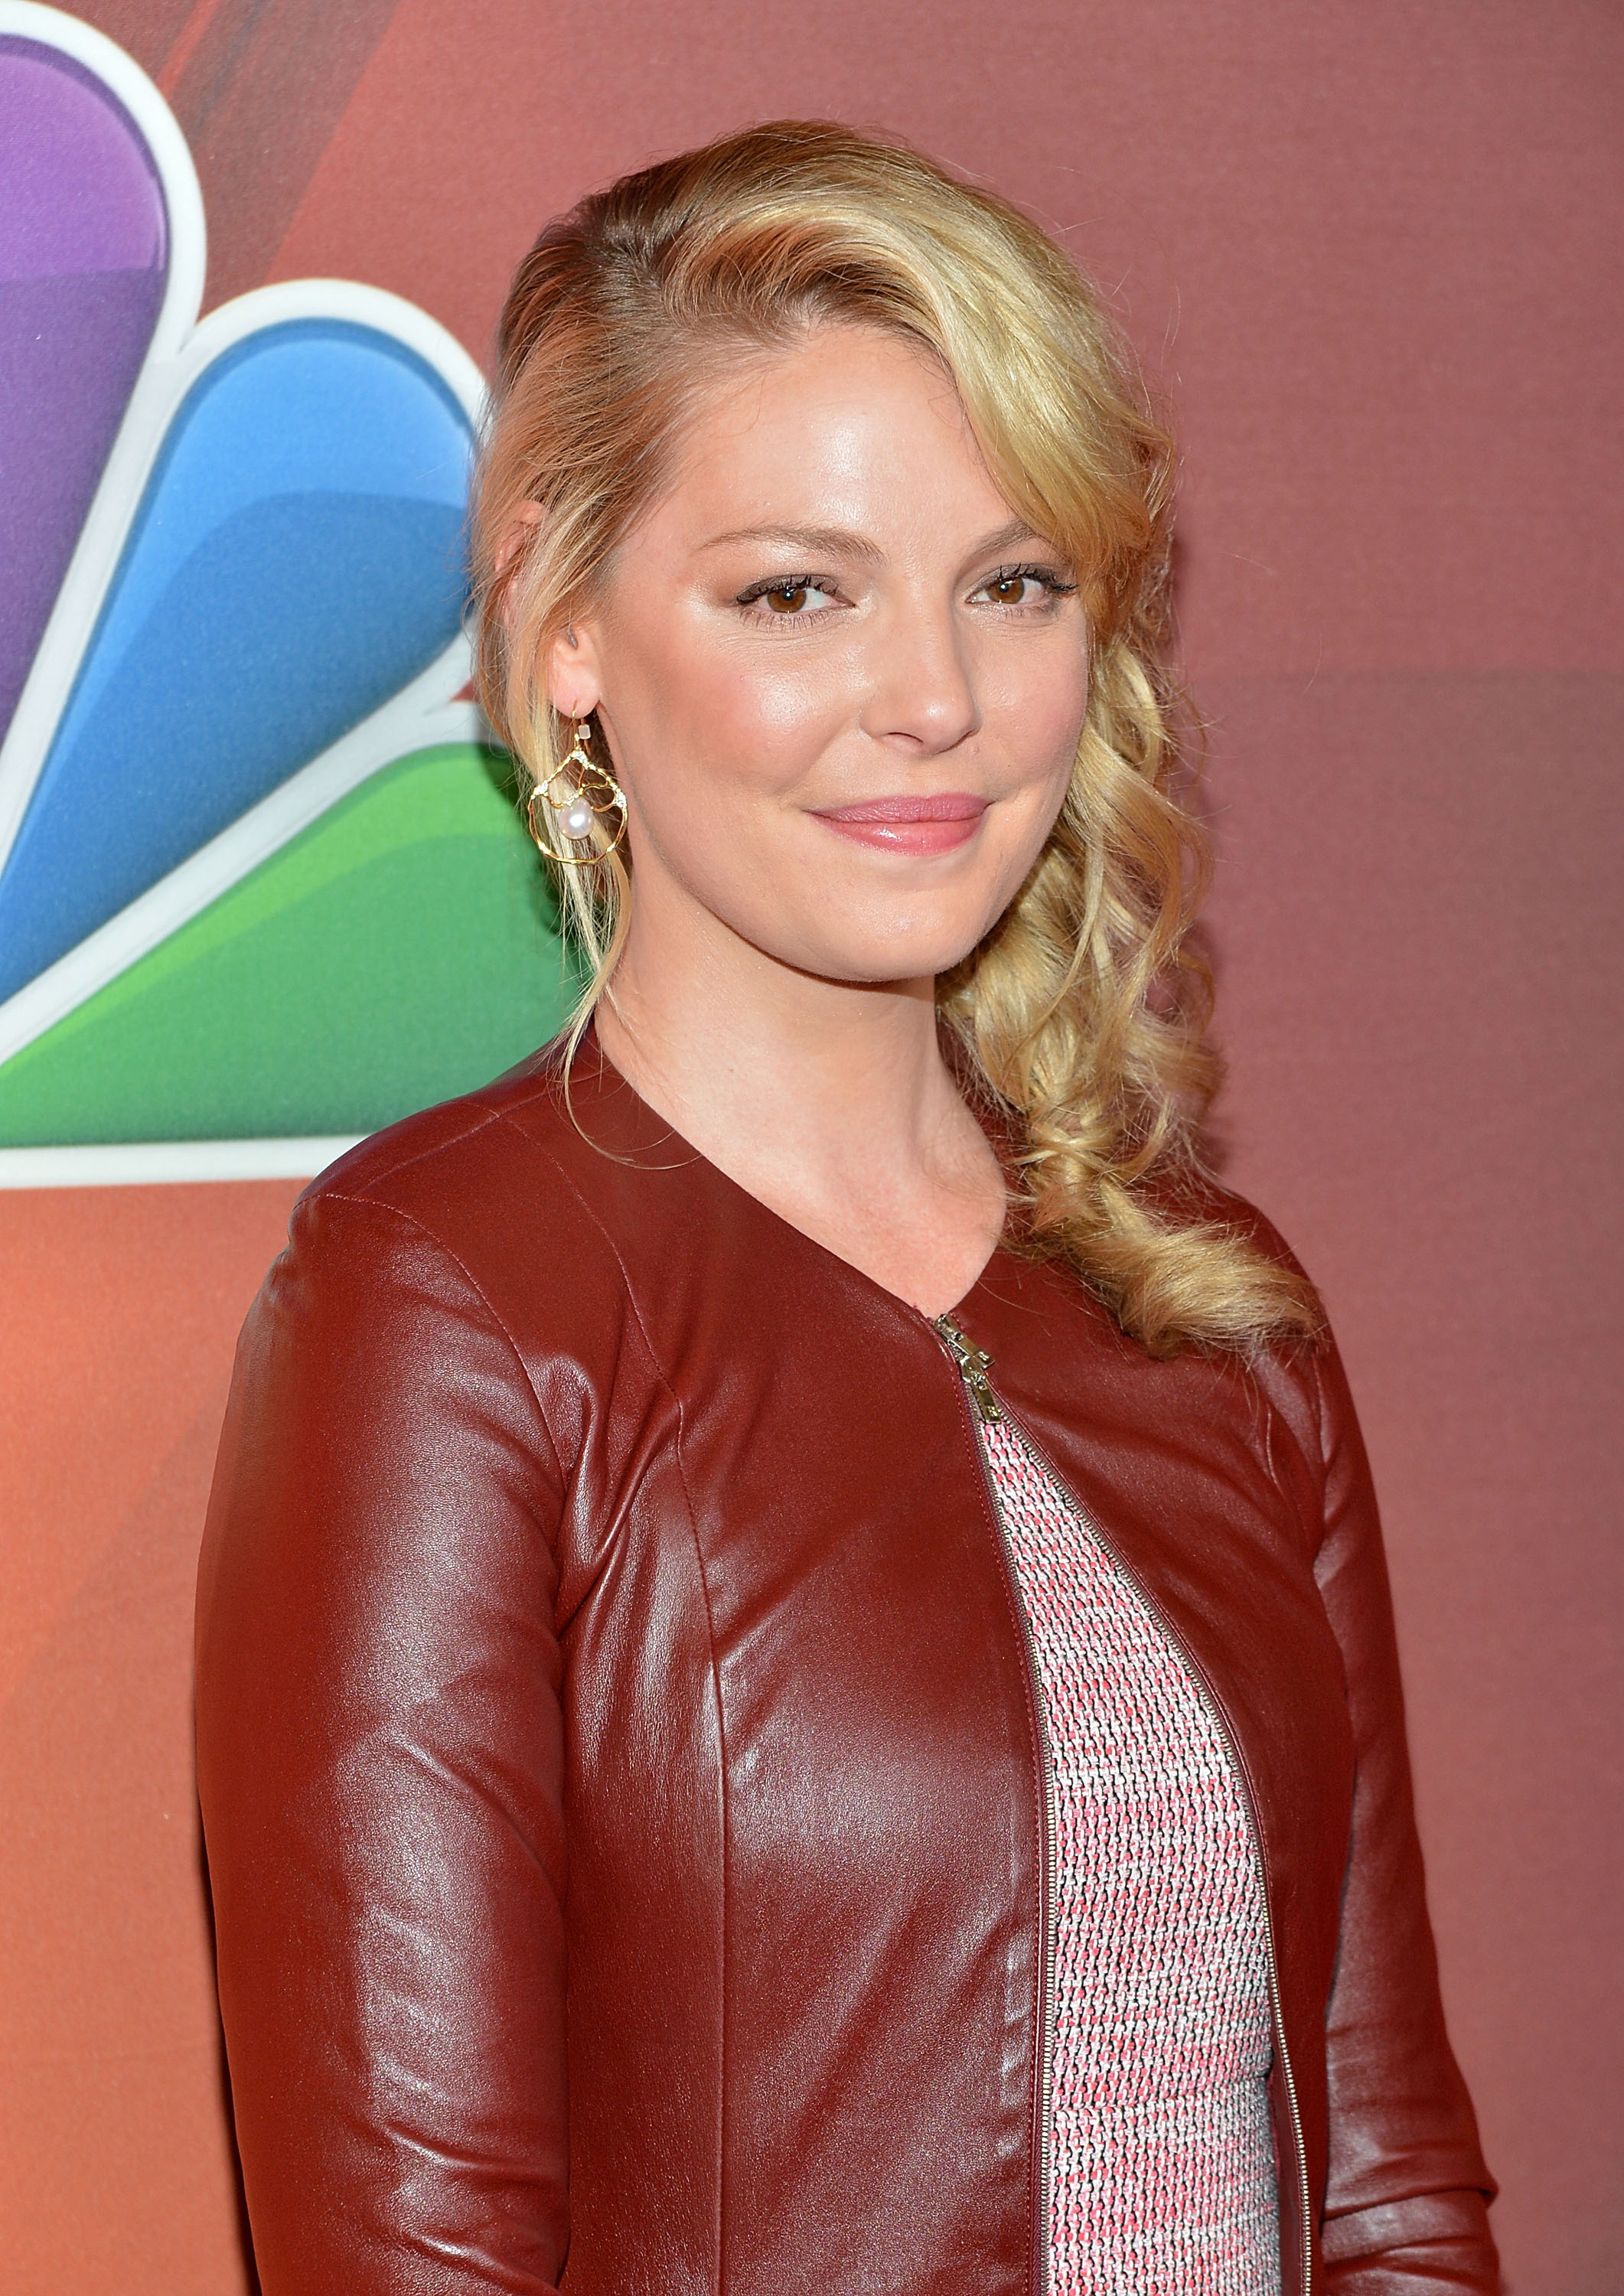 Actress Katherine Heigl attends the 2014 NBC Upfront Presentation at The Jacob K. Javits Convention Center on May 12, 2014 in New York City. (Slaven Vlasic—Getty Images)